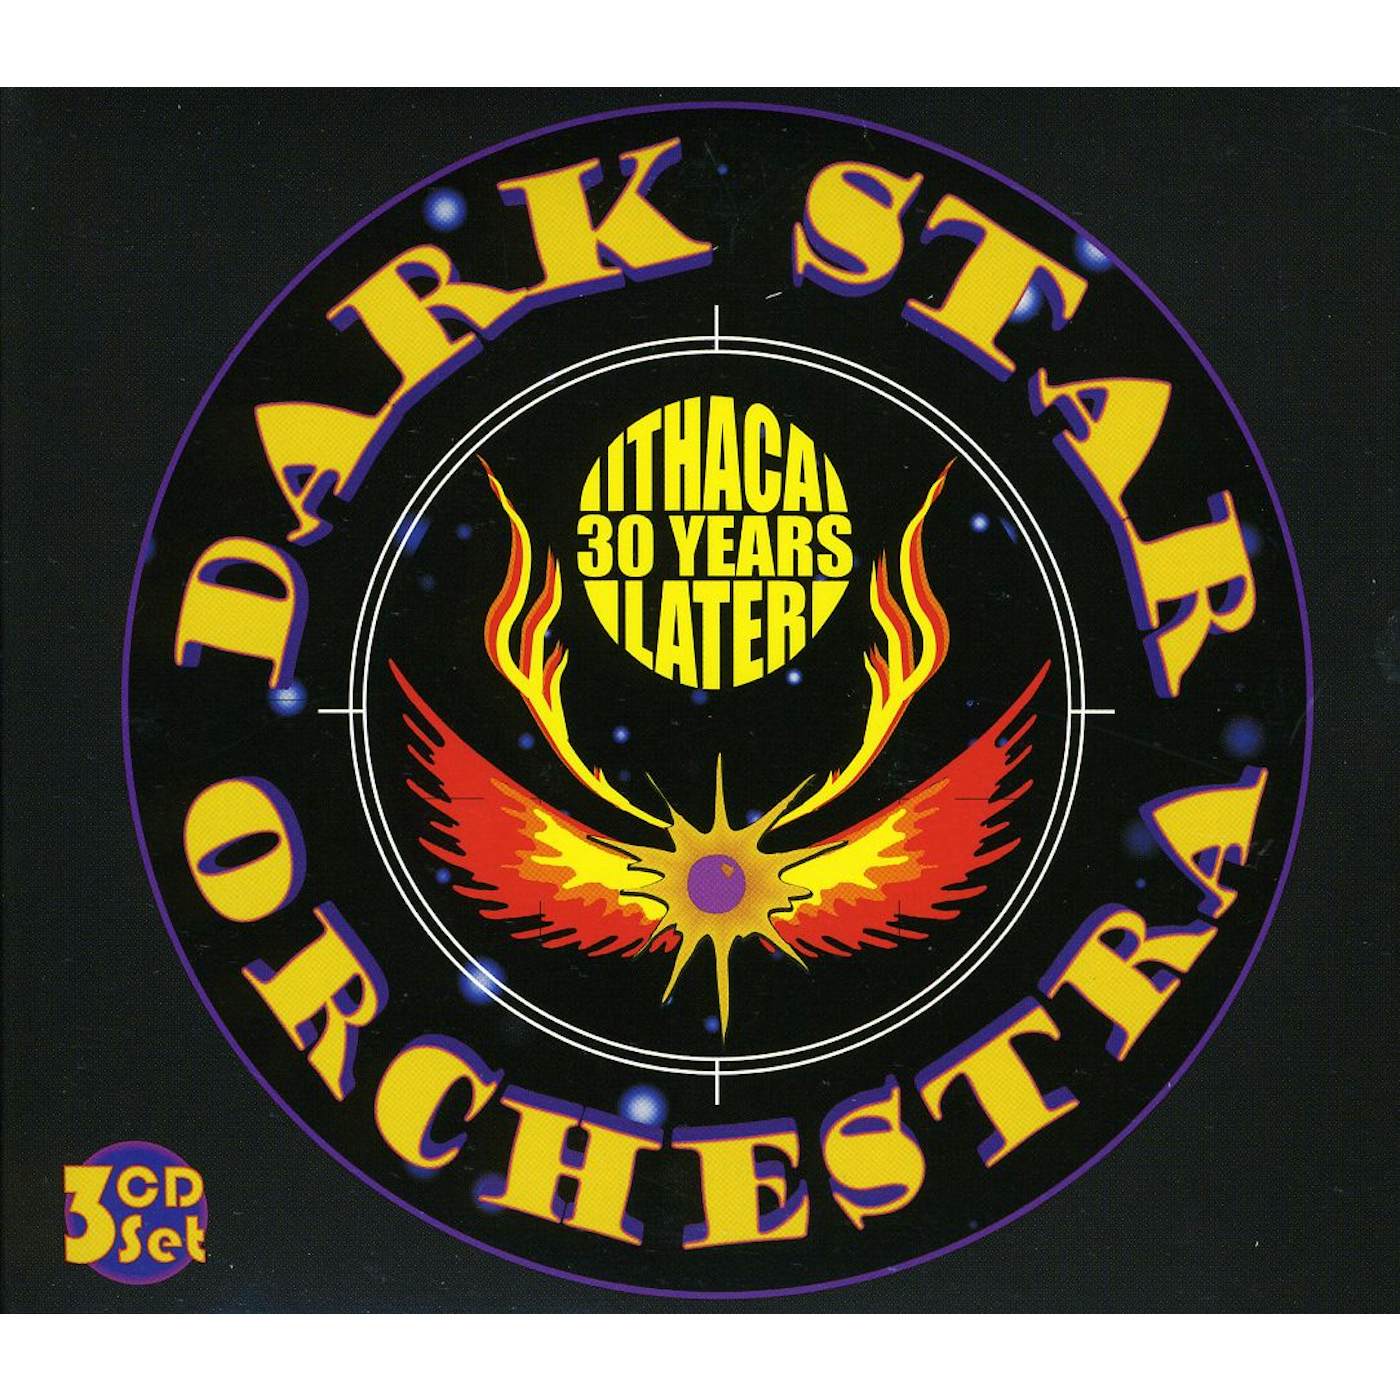 Dark Star Orchestra ITHACA 30 YEARS LATER CD